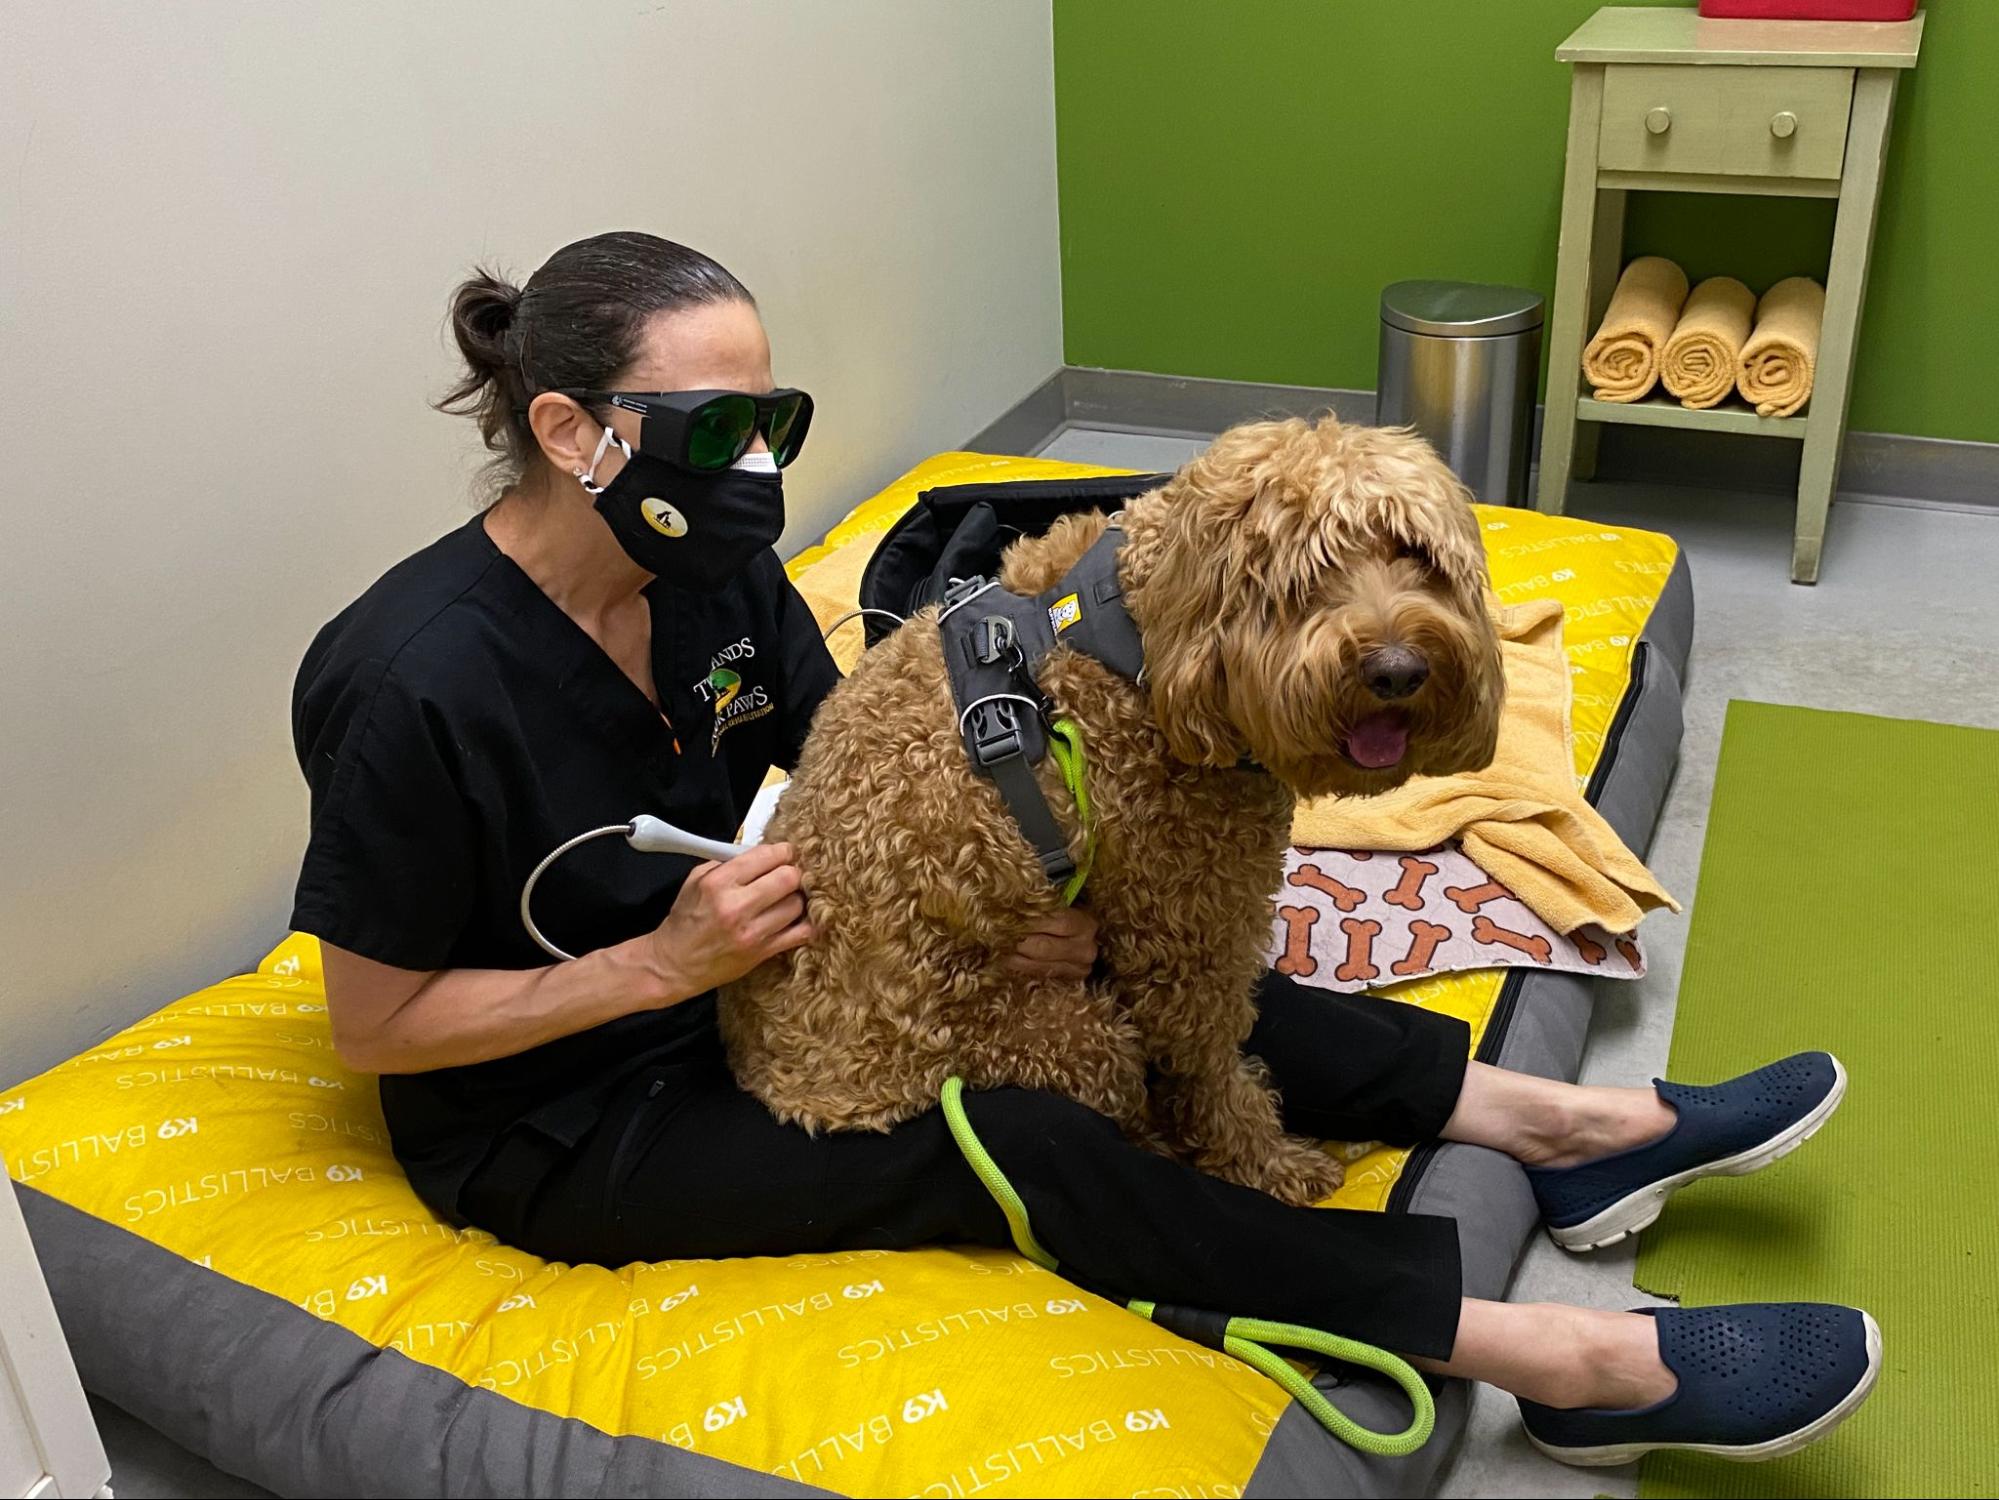 Doodle receiving laser therapy